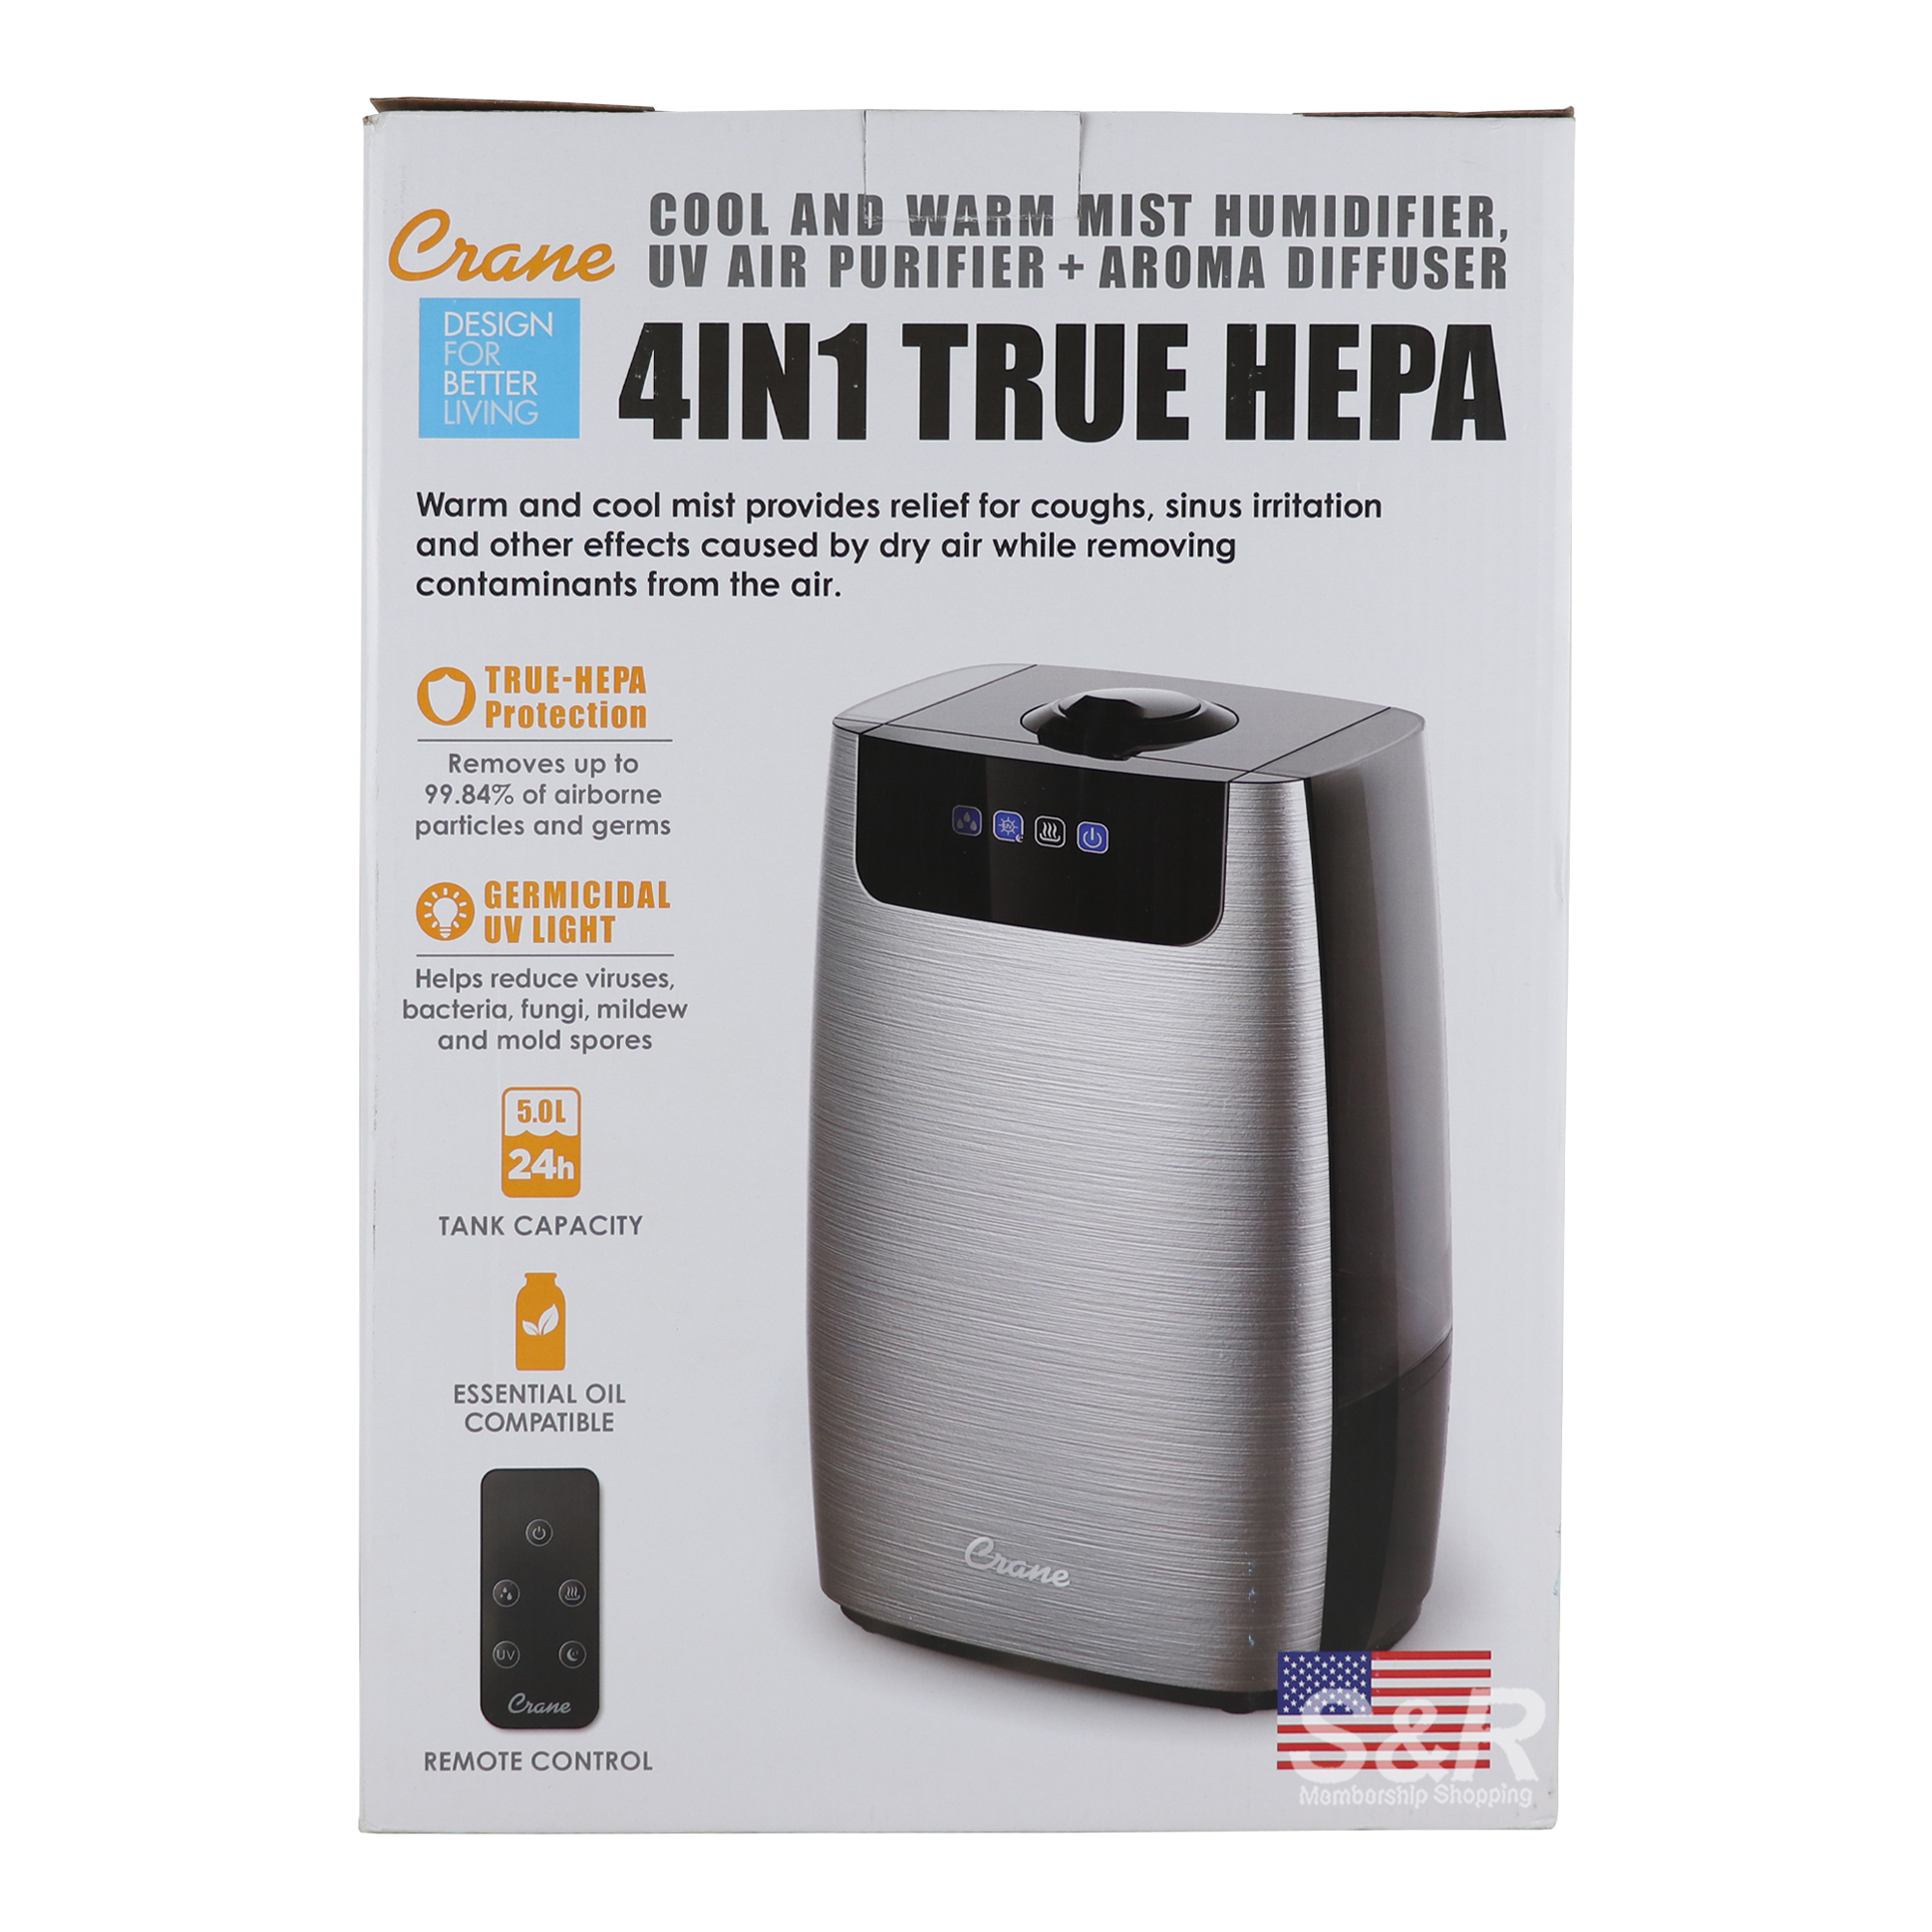 Crane Cool and Warm Mist Humidifier FE-6908 1pc